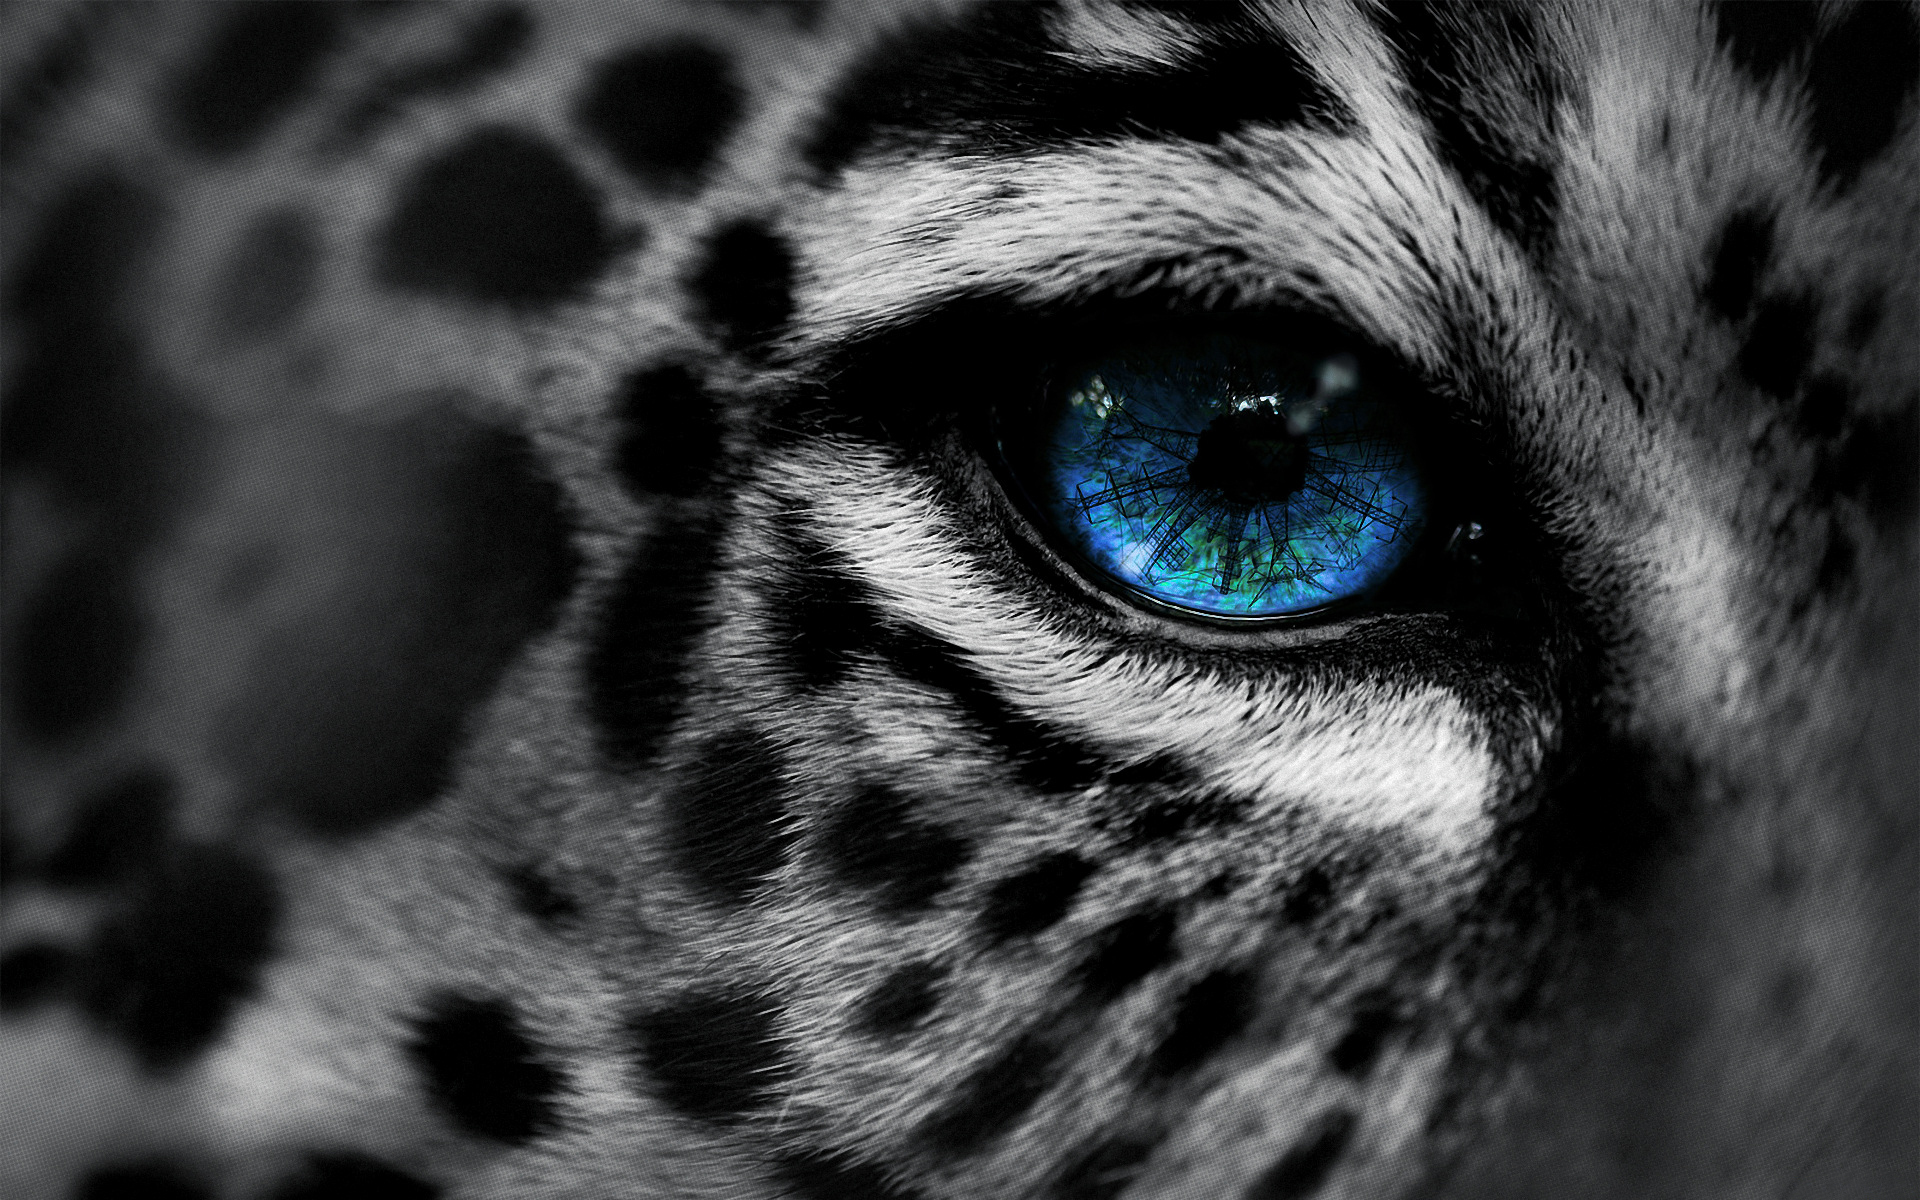  Wallpaper Abyss Explore the Collection Cats Animal Leopard 184801 1920x1200